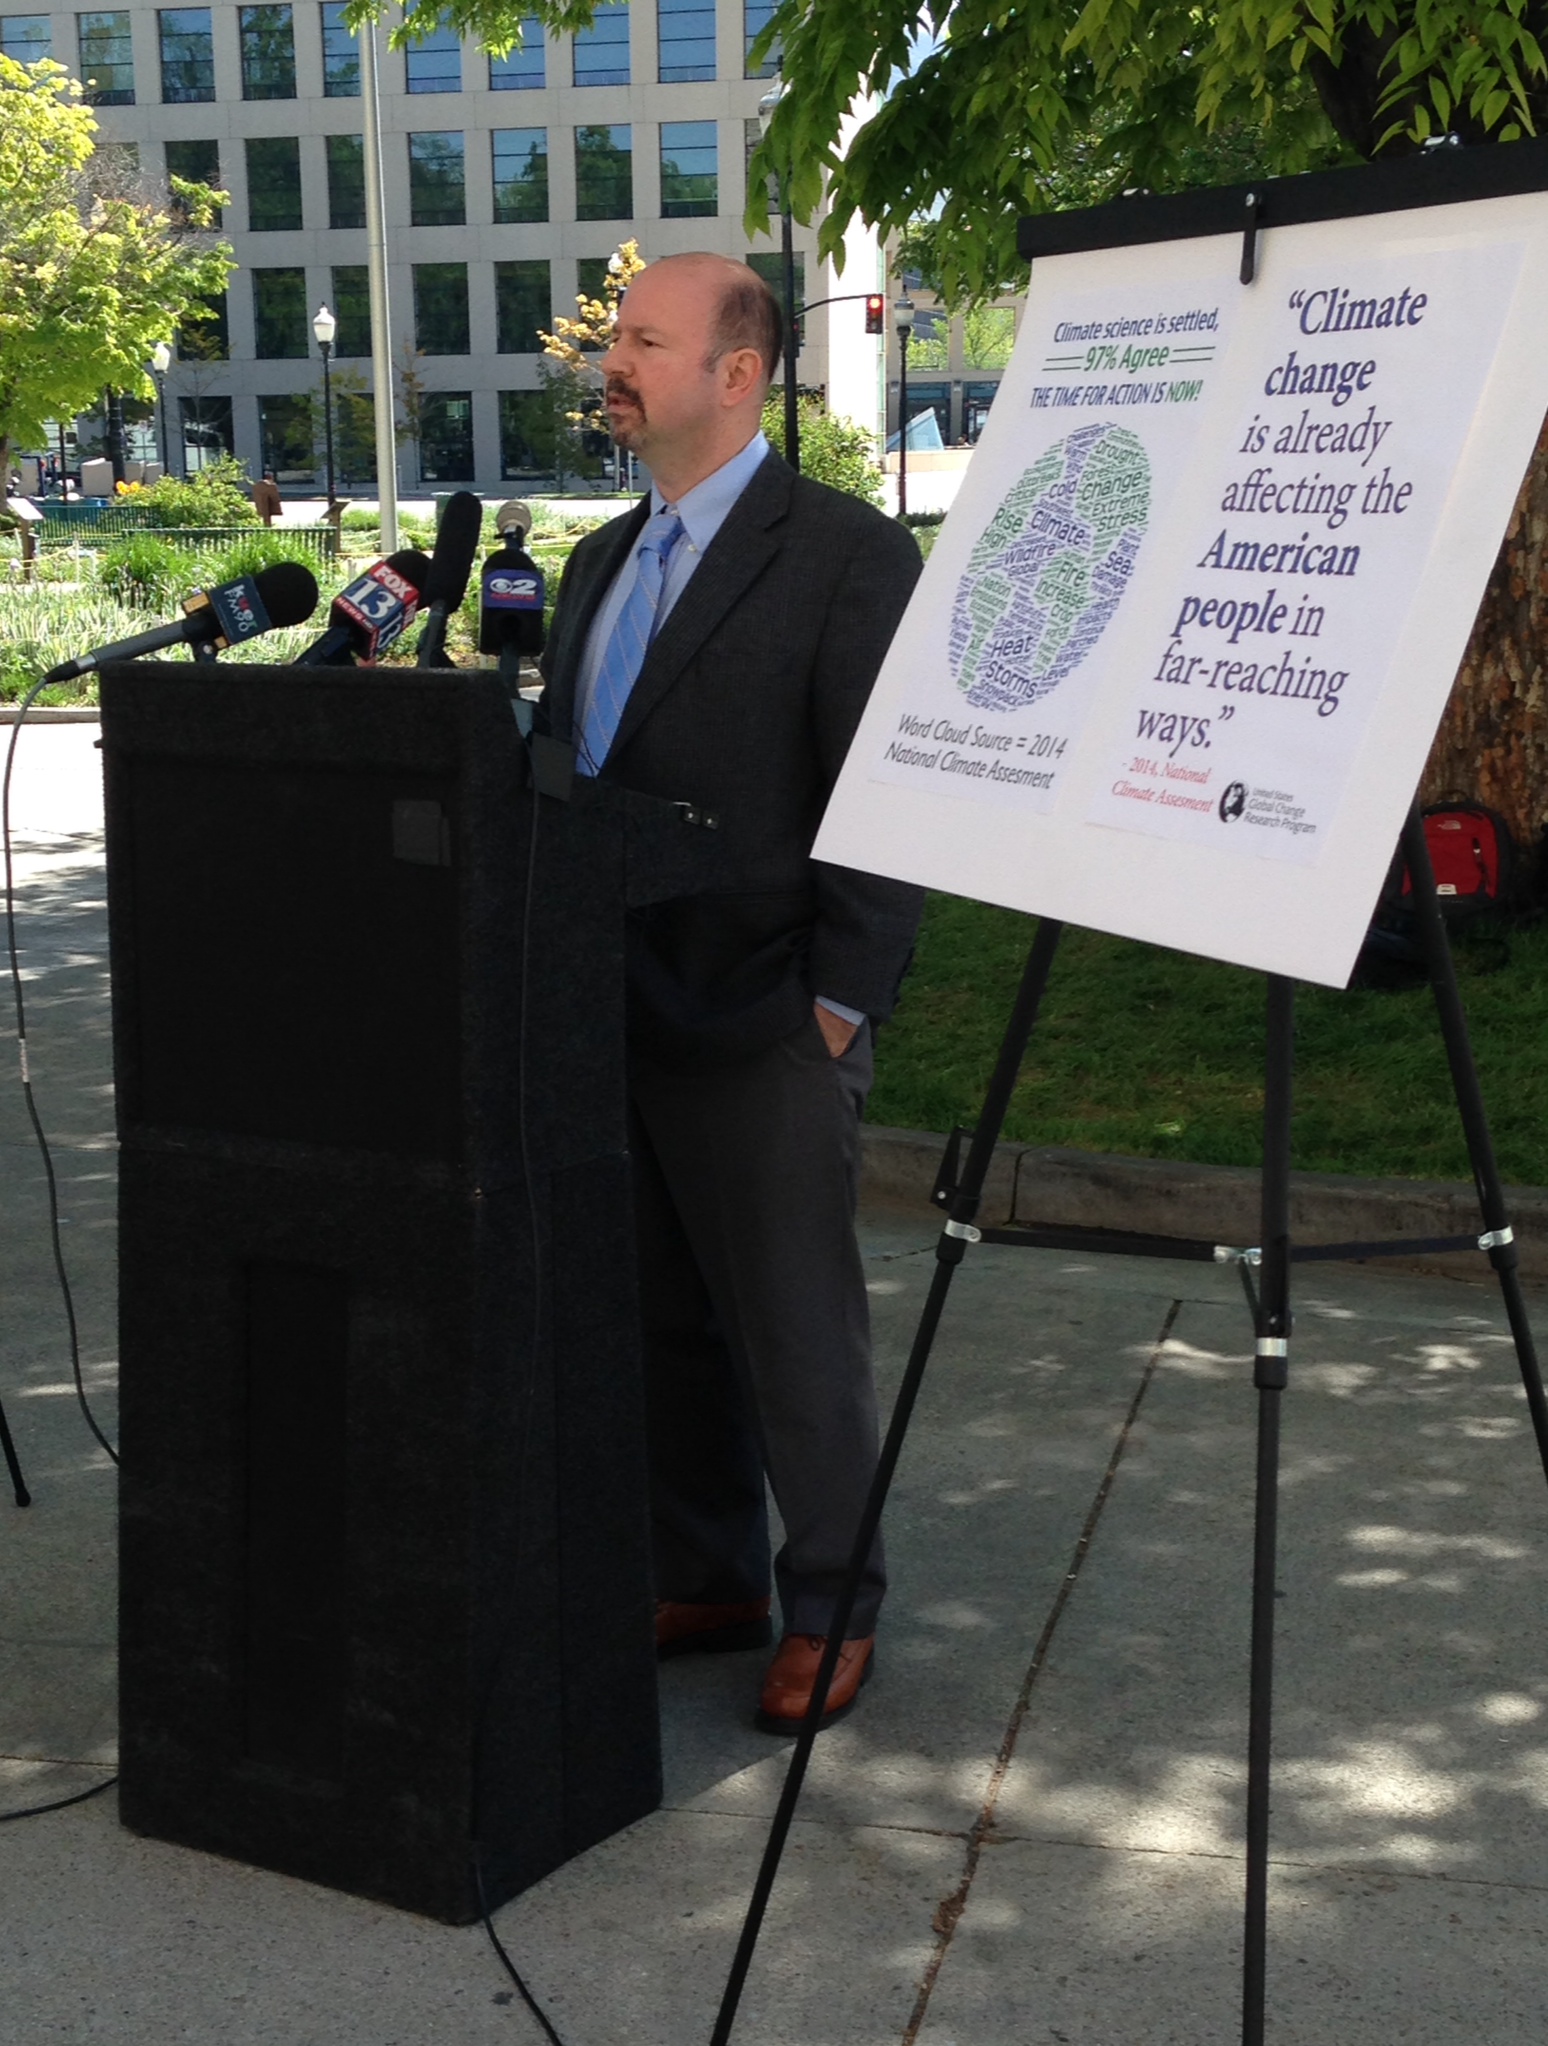 Dr. Michael Mann, a climatologist from Penn State University, speaks outside the Salt Lake City and County Building on May 14, 2014.